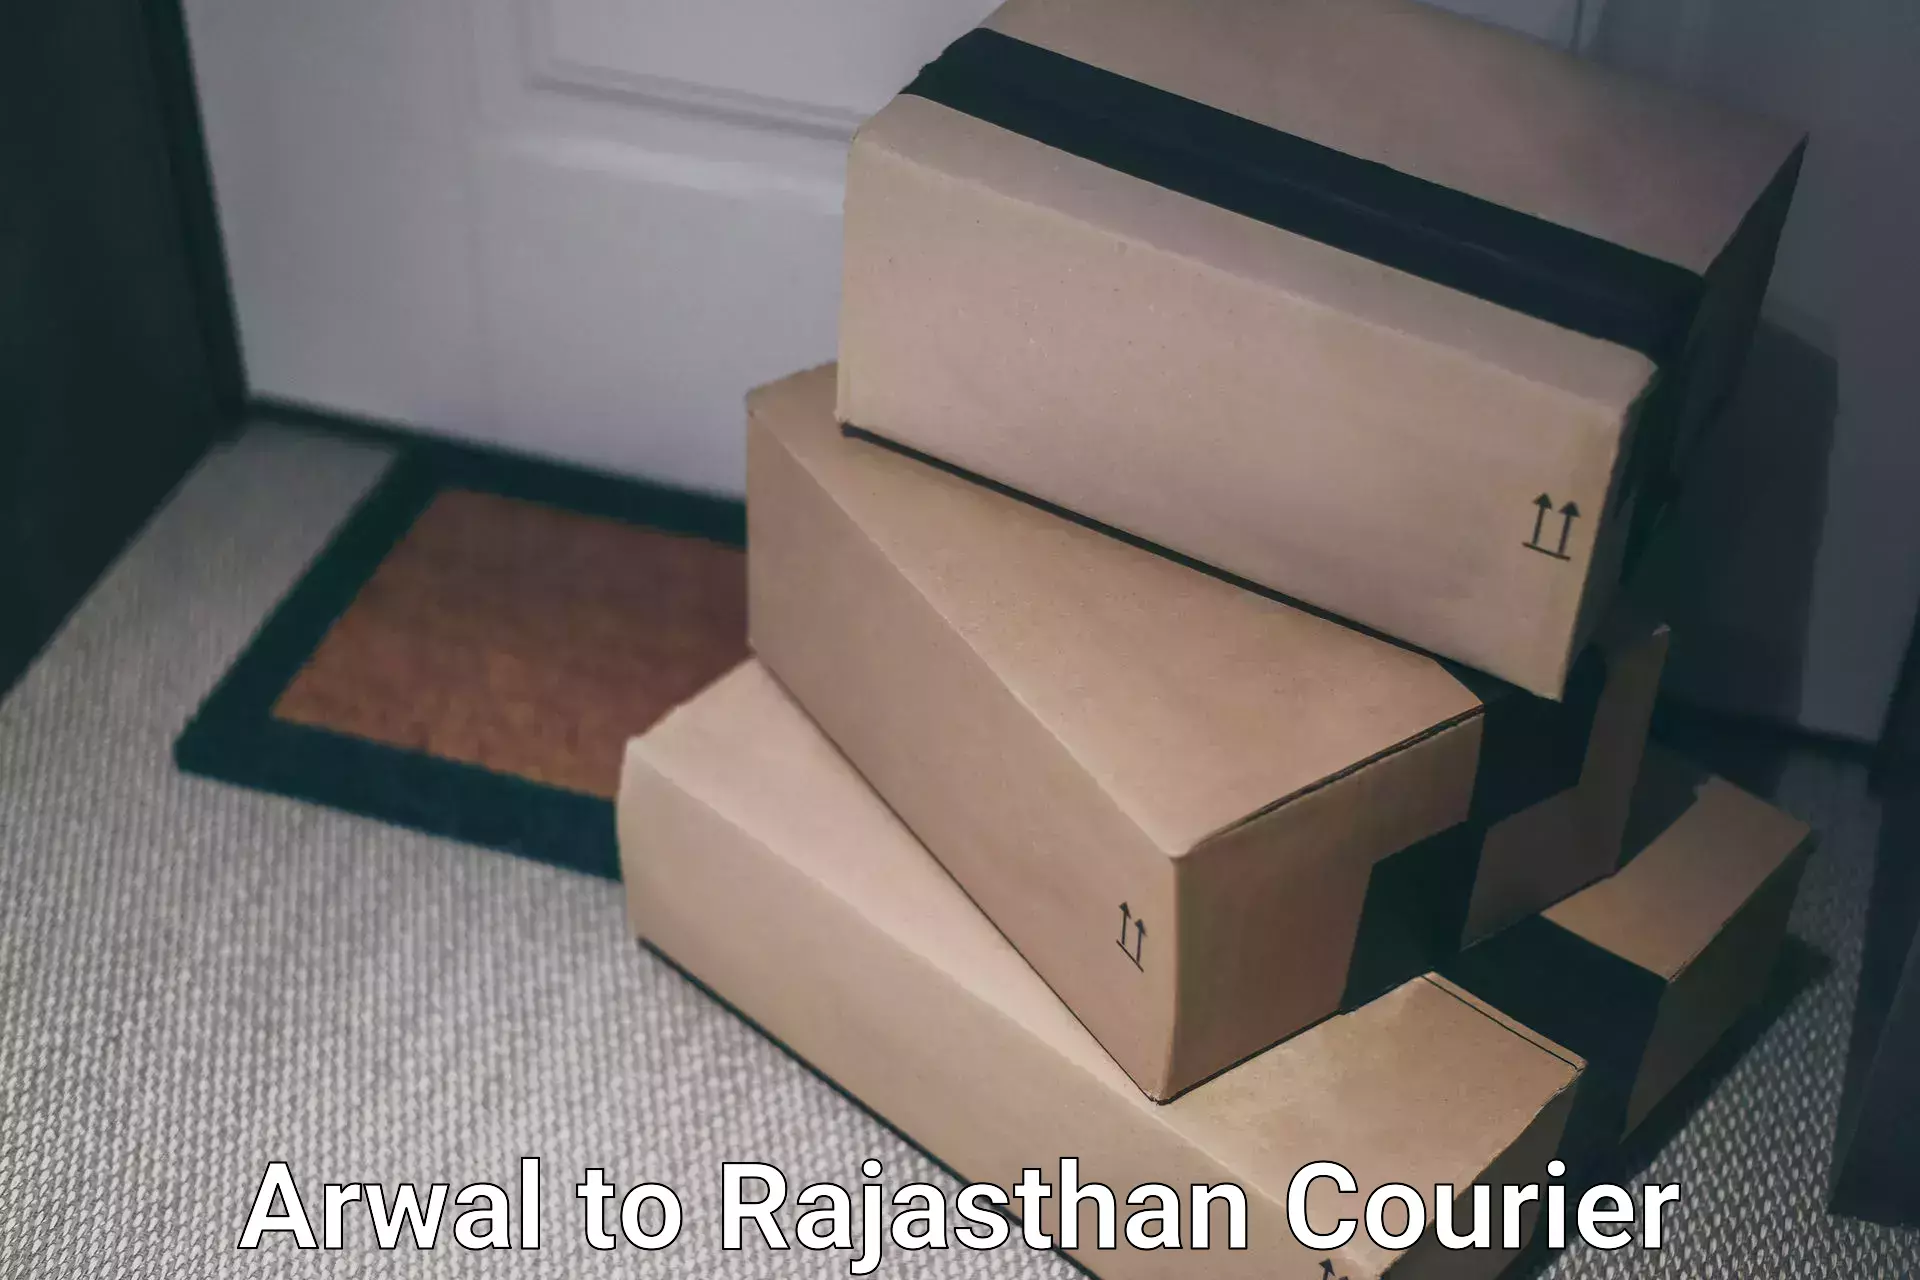 Parcel service for businesses Arwal to Rajasthan